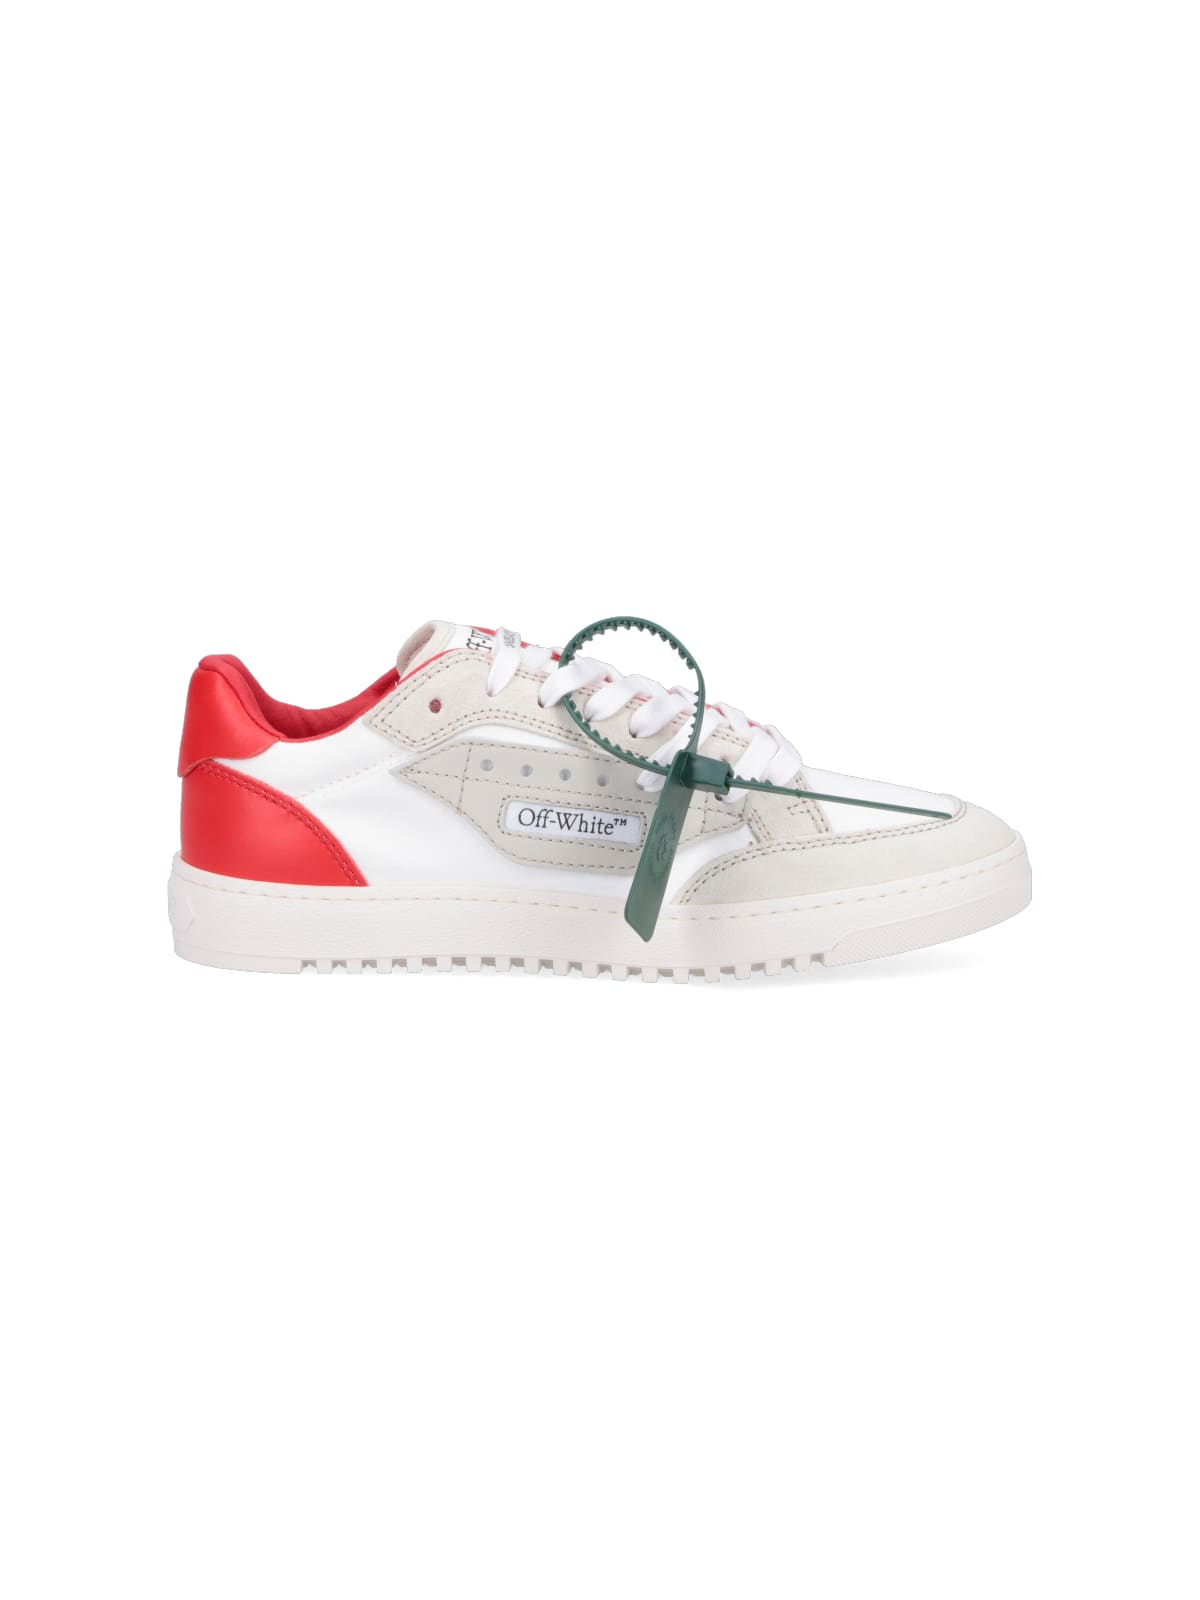 OFF-WHITE OFF-COURT 5.0 SNEAKERS